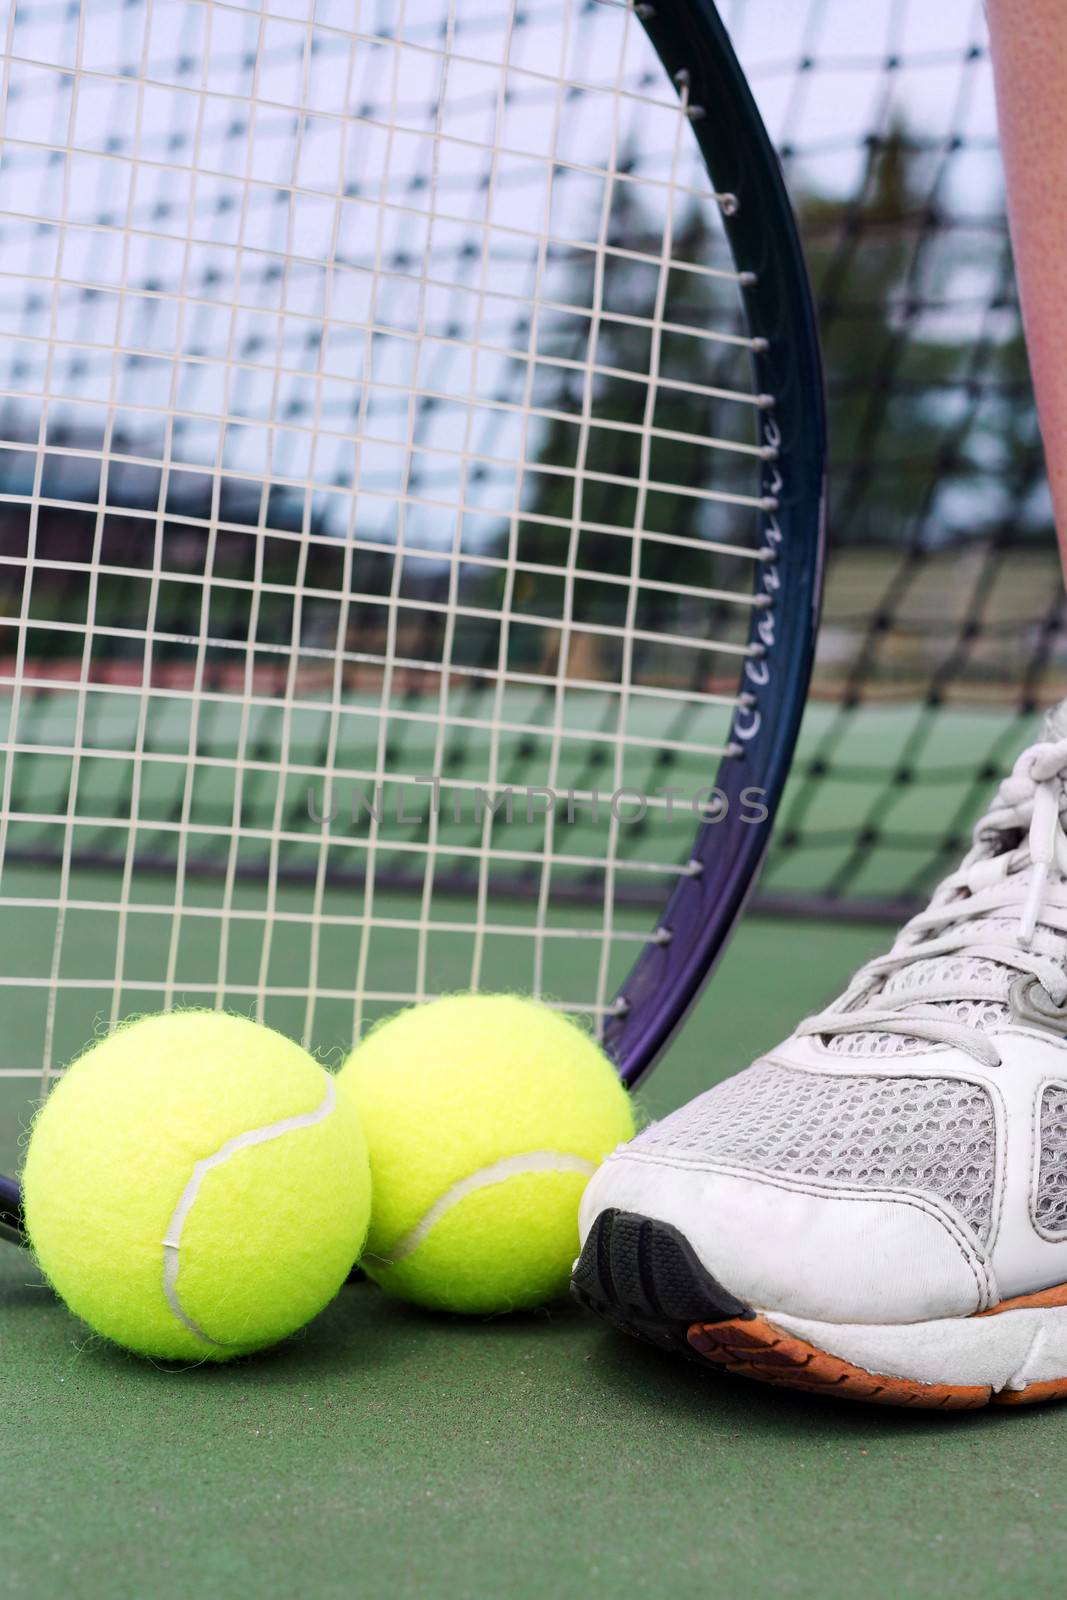 Tennis shoe, racket and balls on a hard court in fron tof net.